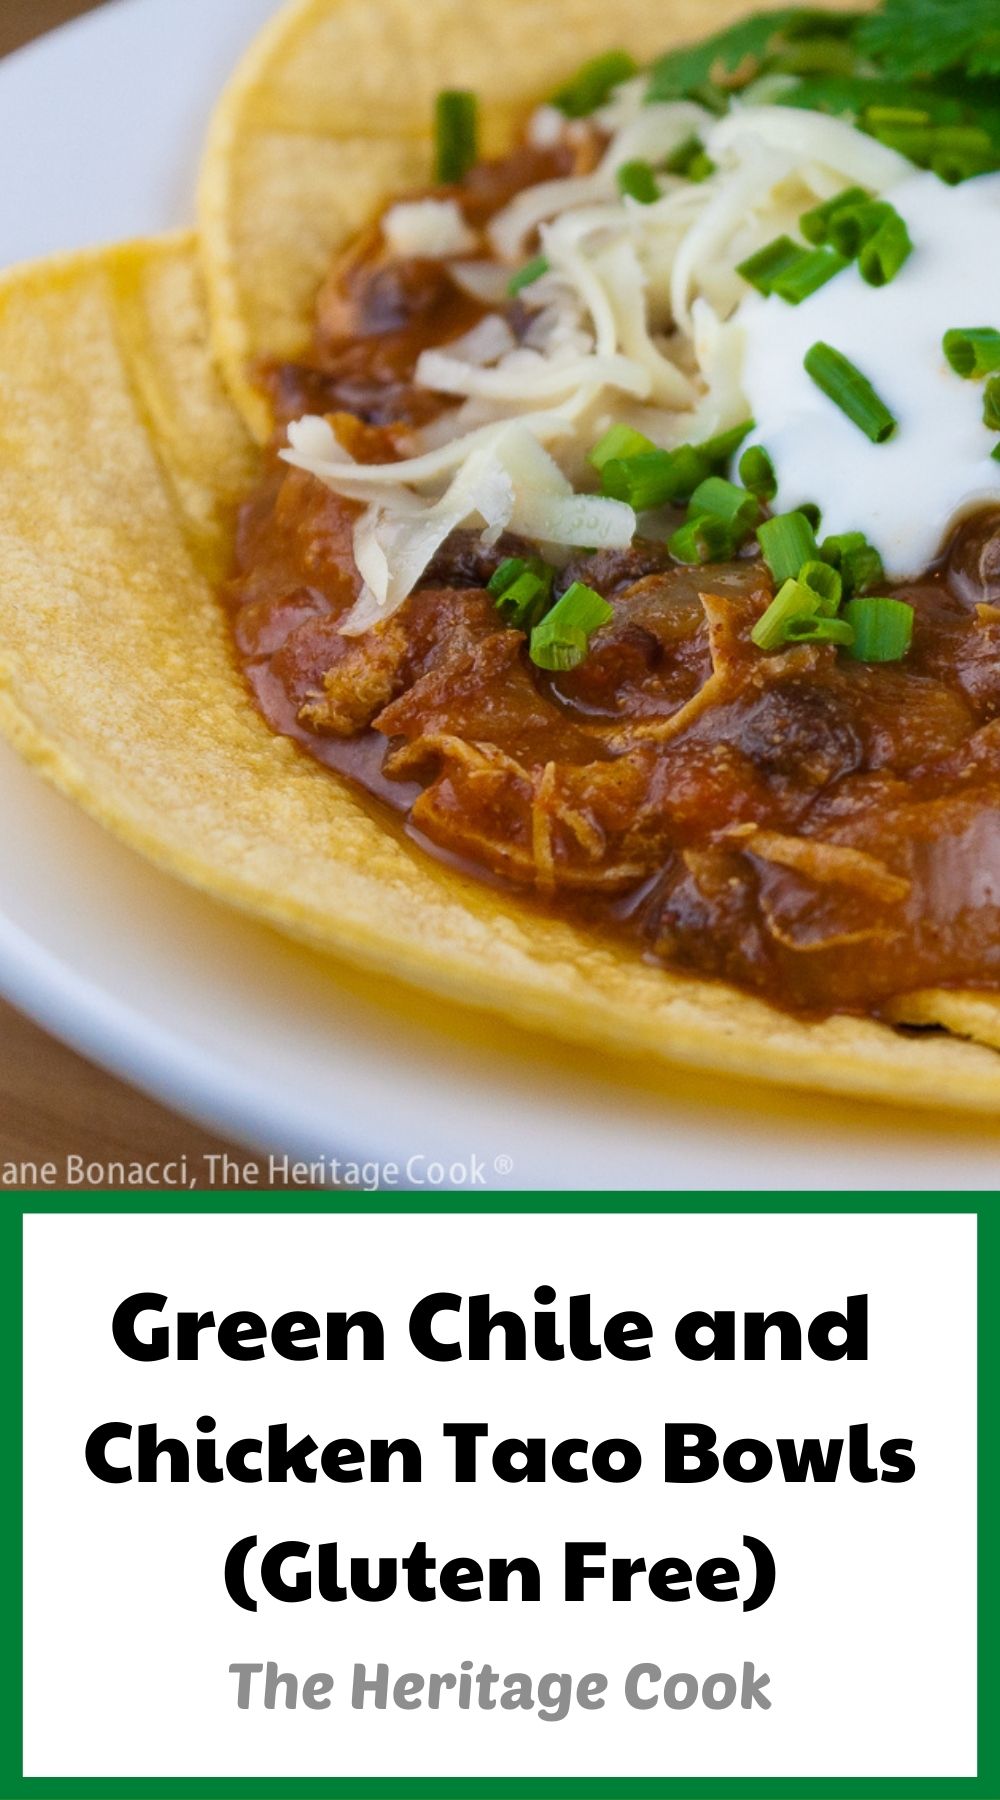 Green Chile and Chicken Taco Bowls (Gluten Free) © 2022 Jane Bonacci, The Heritage Cook